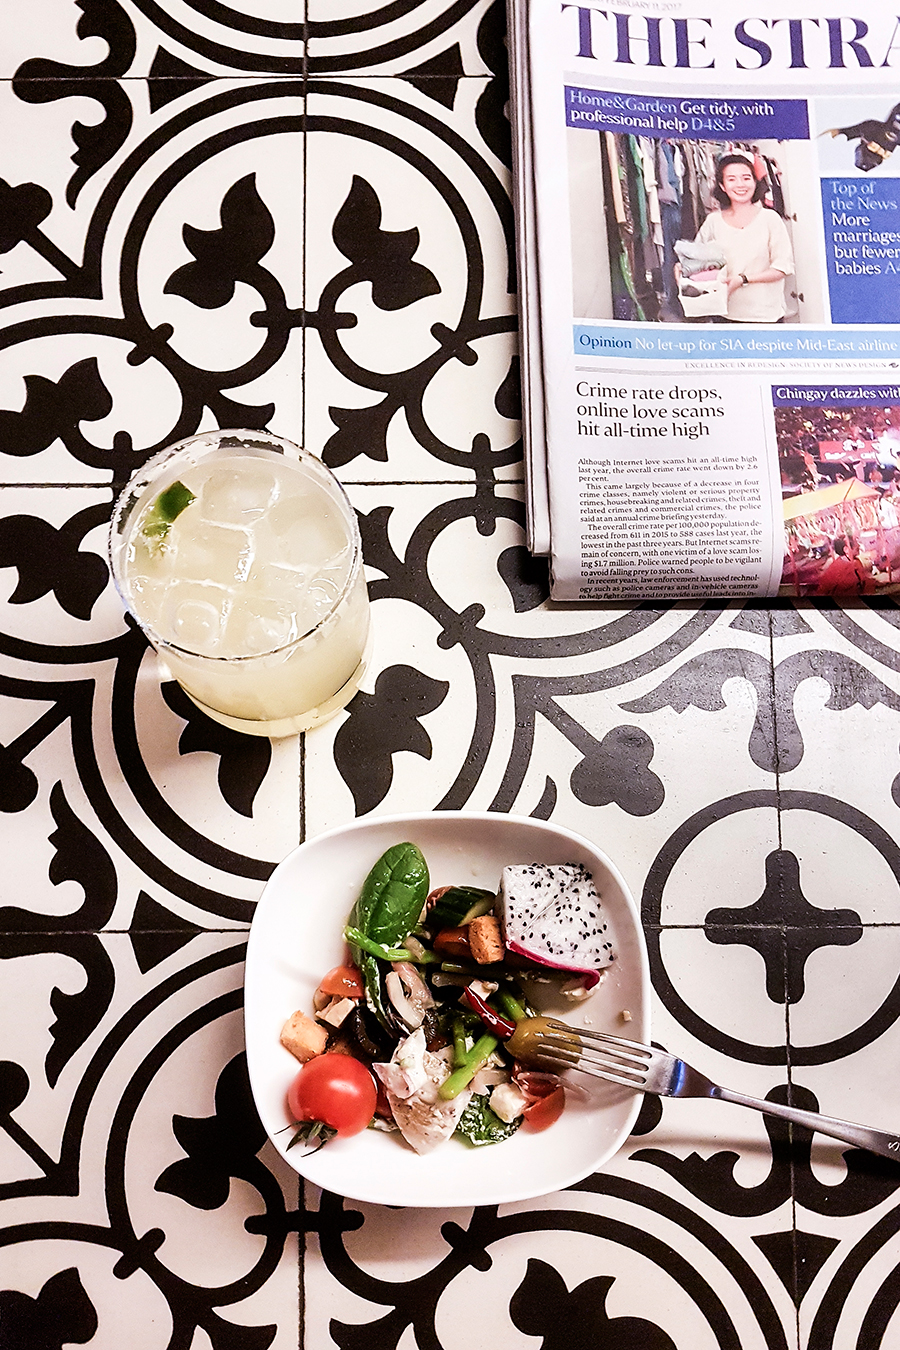 Salad, Margarita, and The Straits Times at the Orchid Club Lounge on level 16 at PARKROYAL on Pickering hotel, Singapore.